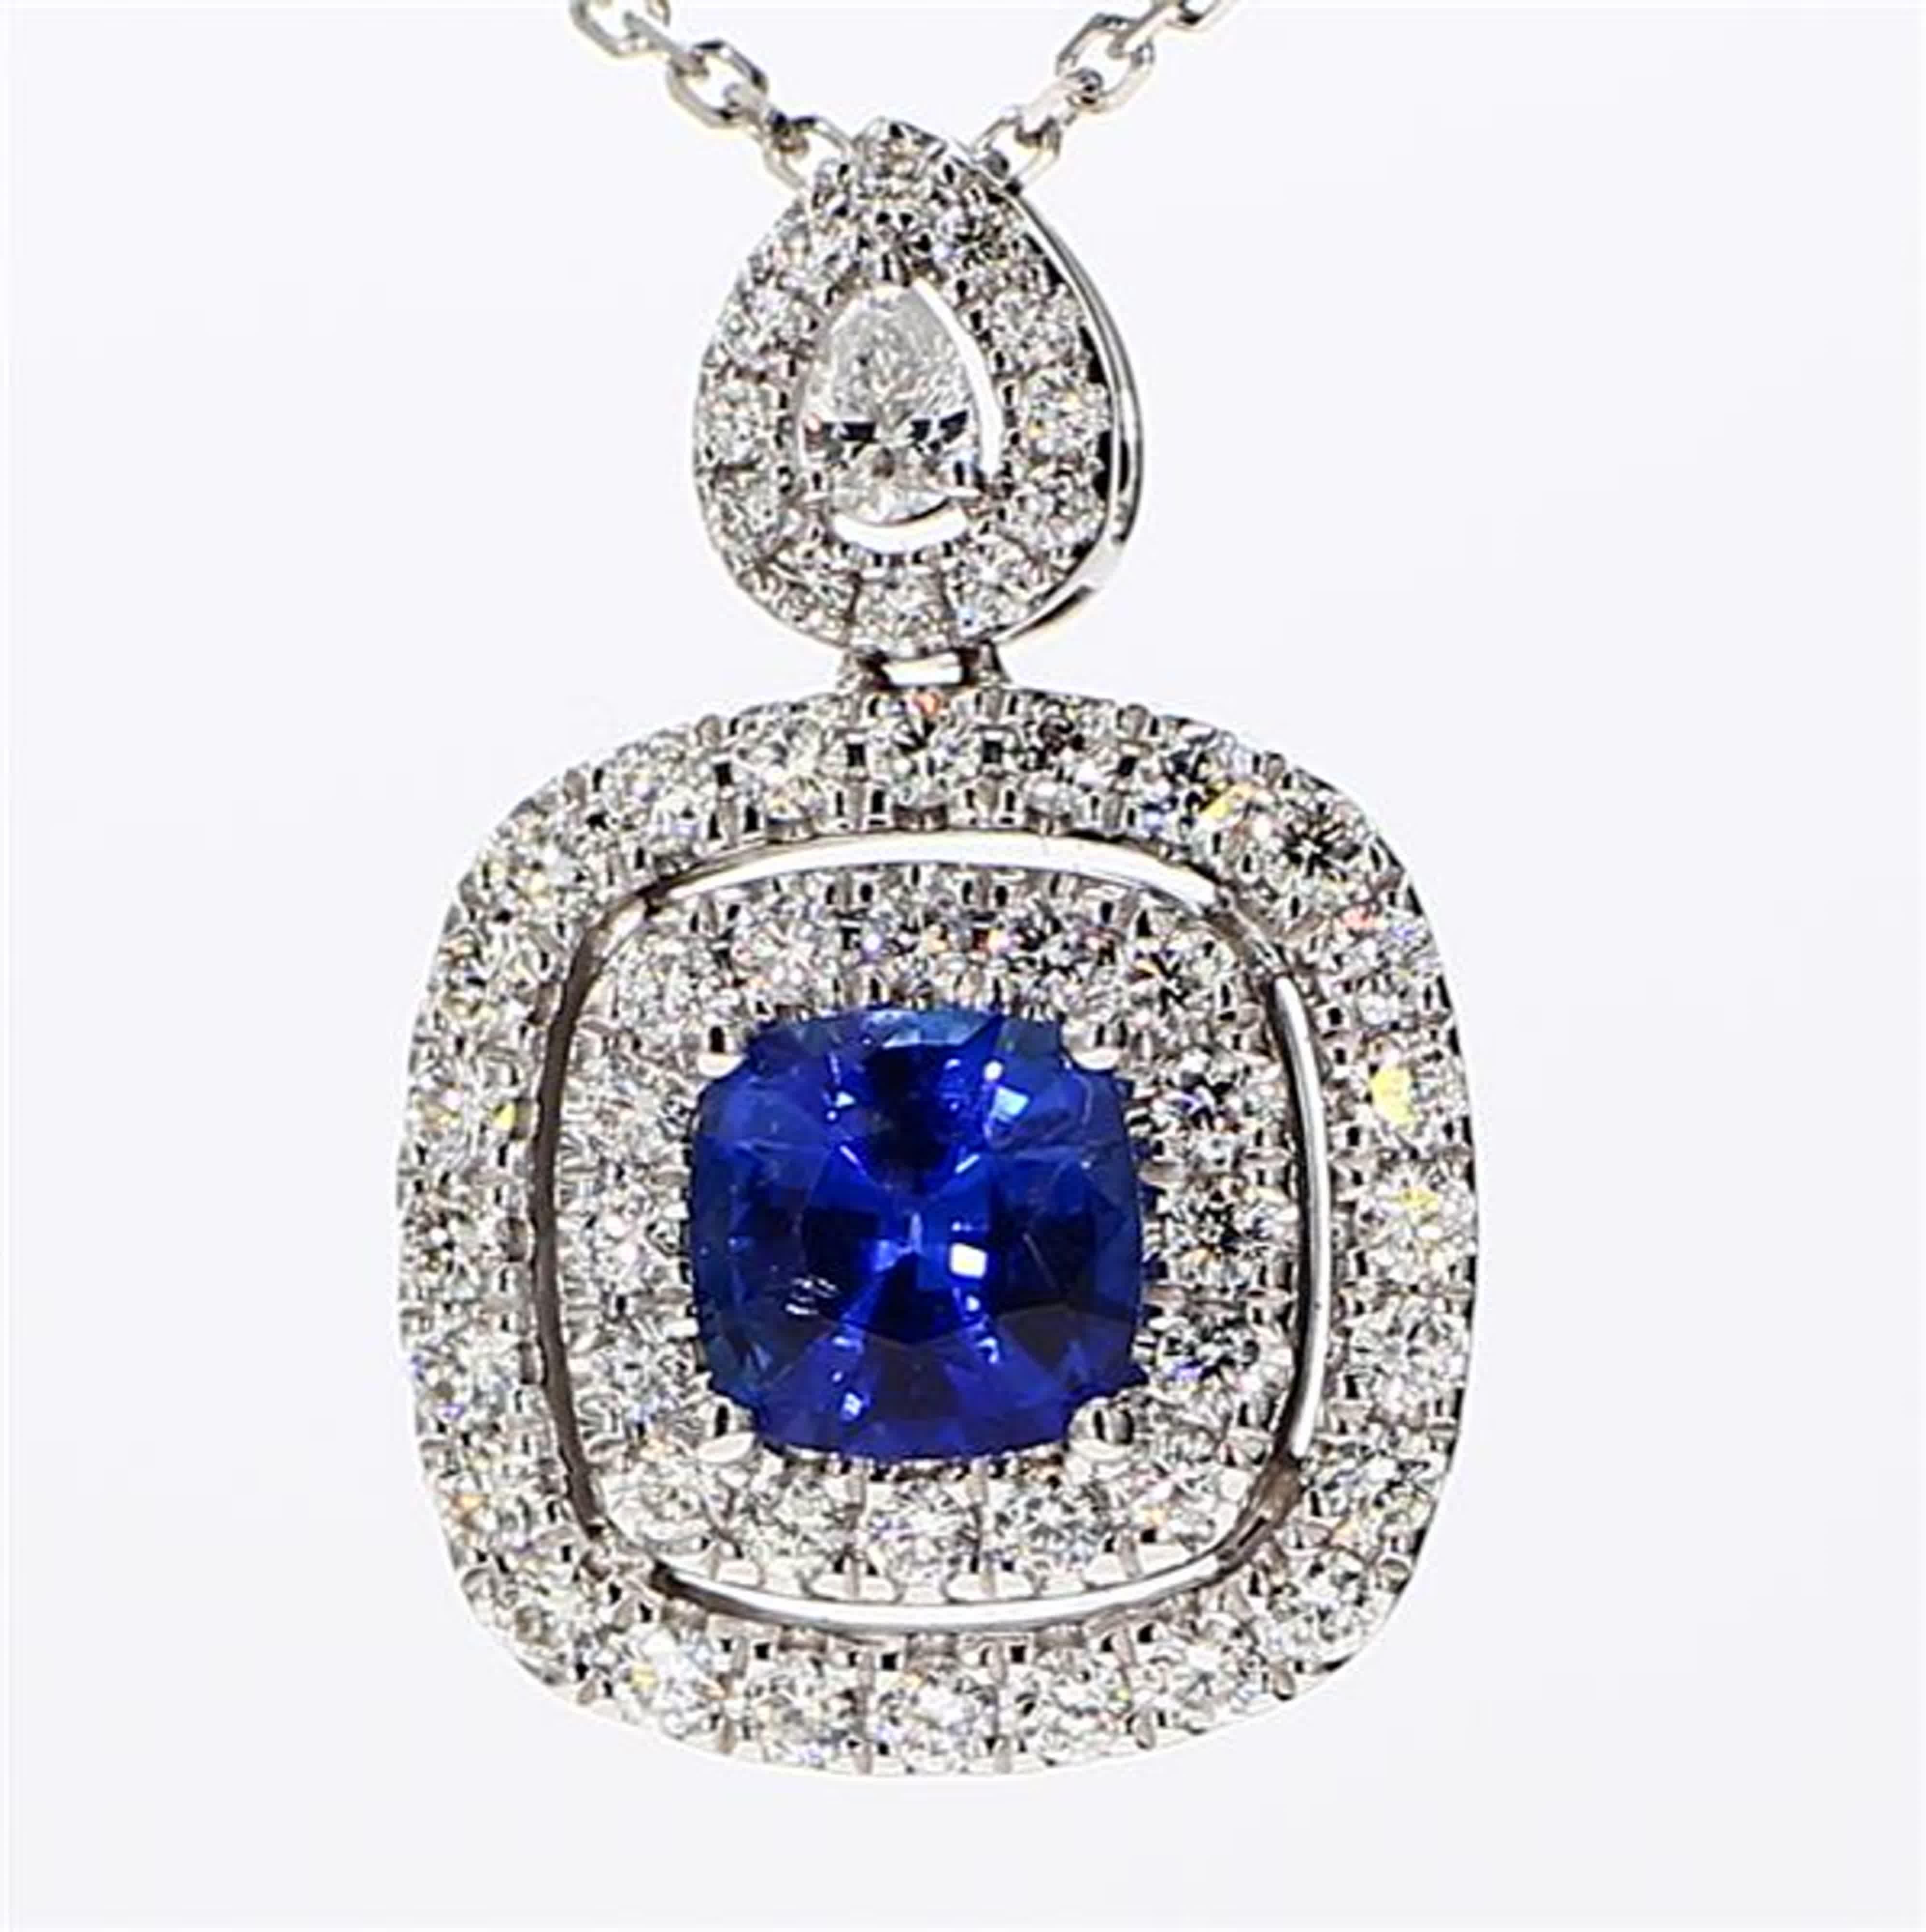 RareGemWorld's classic sapphire pendant. Mounted in a beautiful 18K White Gold setting with a natural cushion cut blue sapphire. The sapphire is surrounded by natural round white diamond melee as well as a natural pear cut white diamond. This